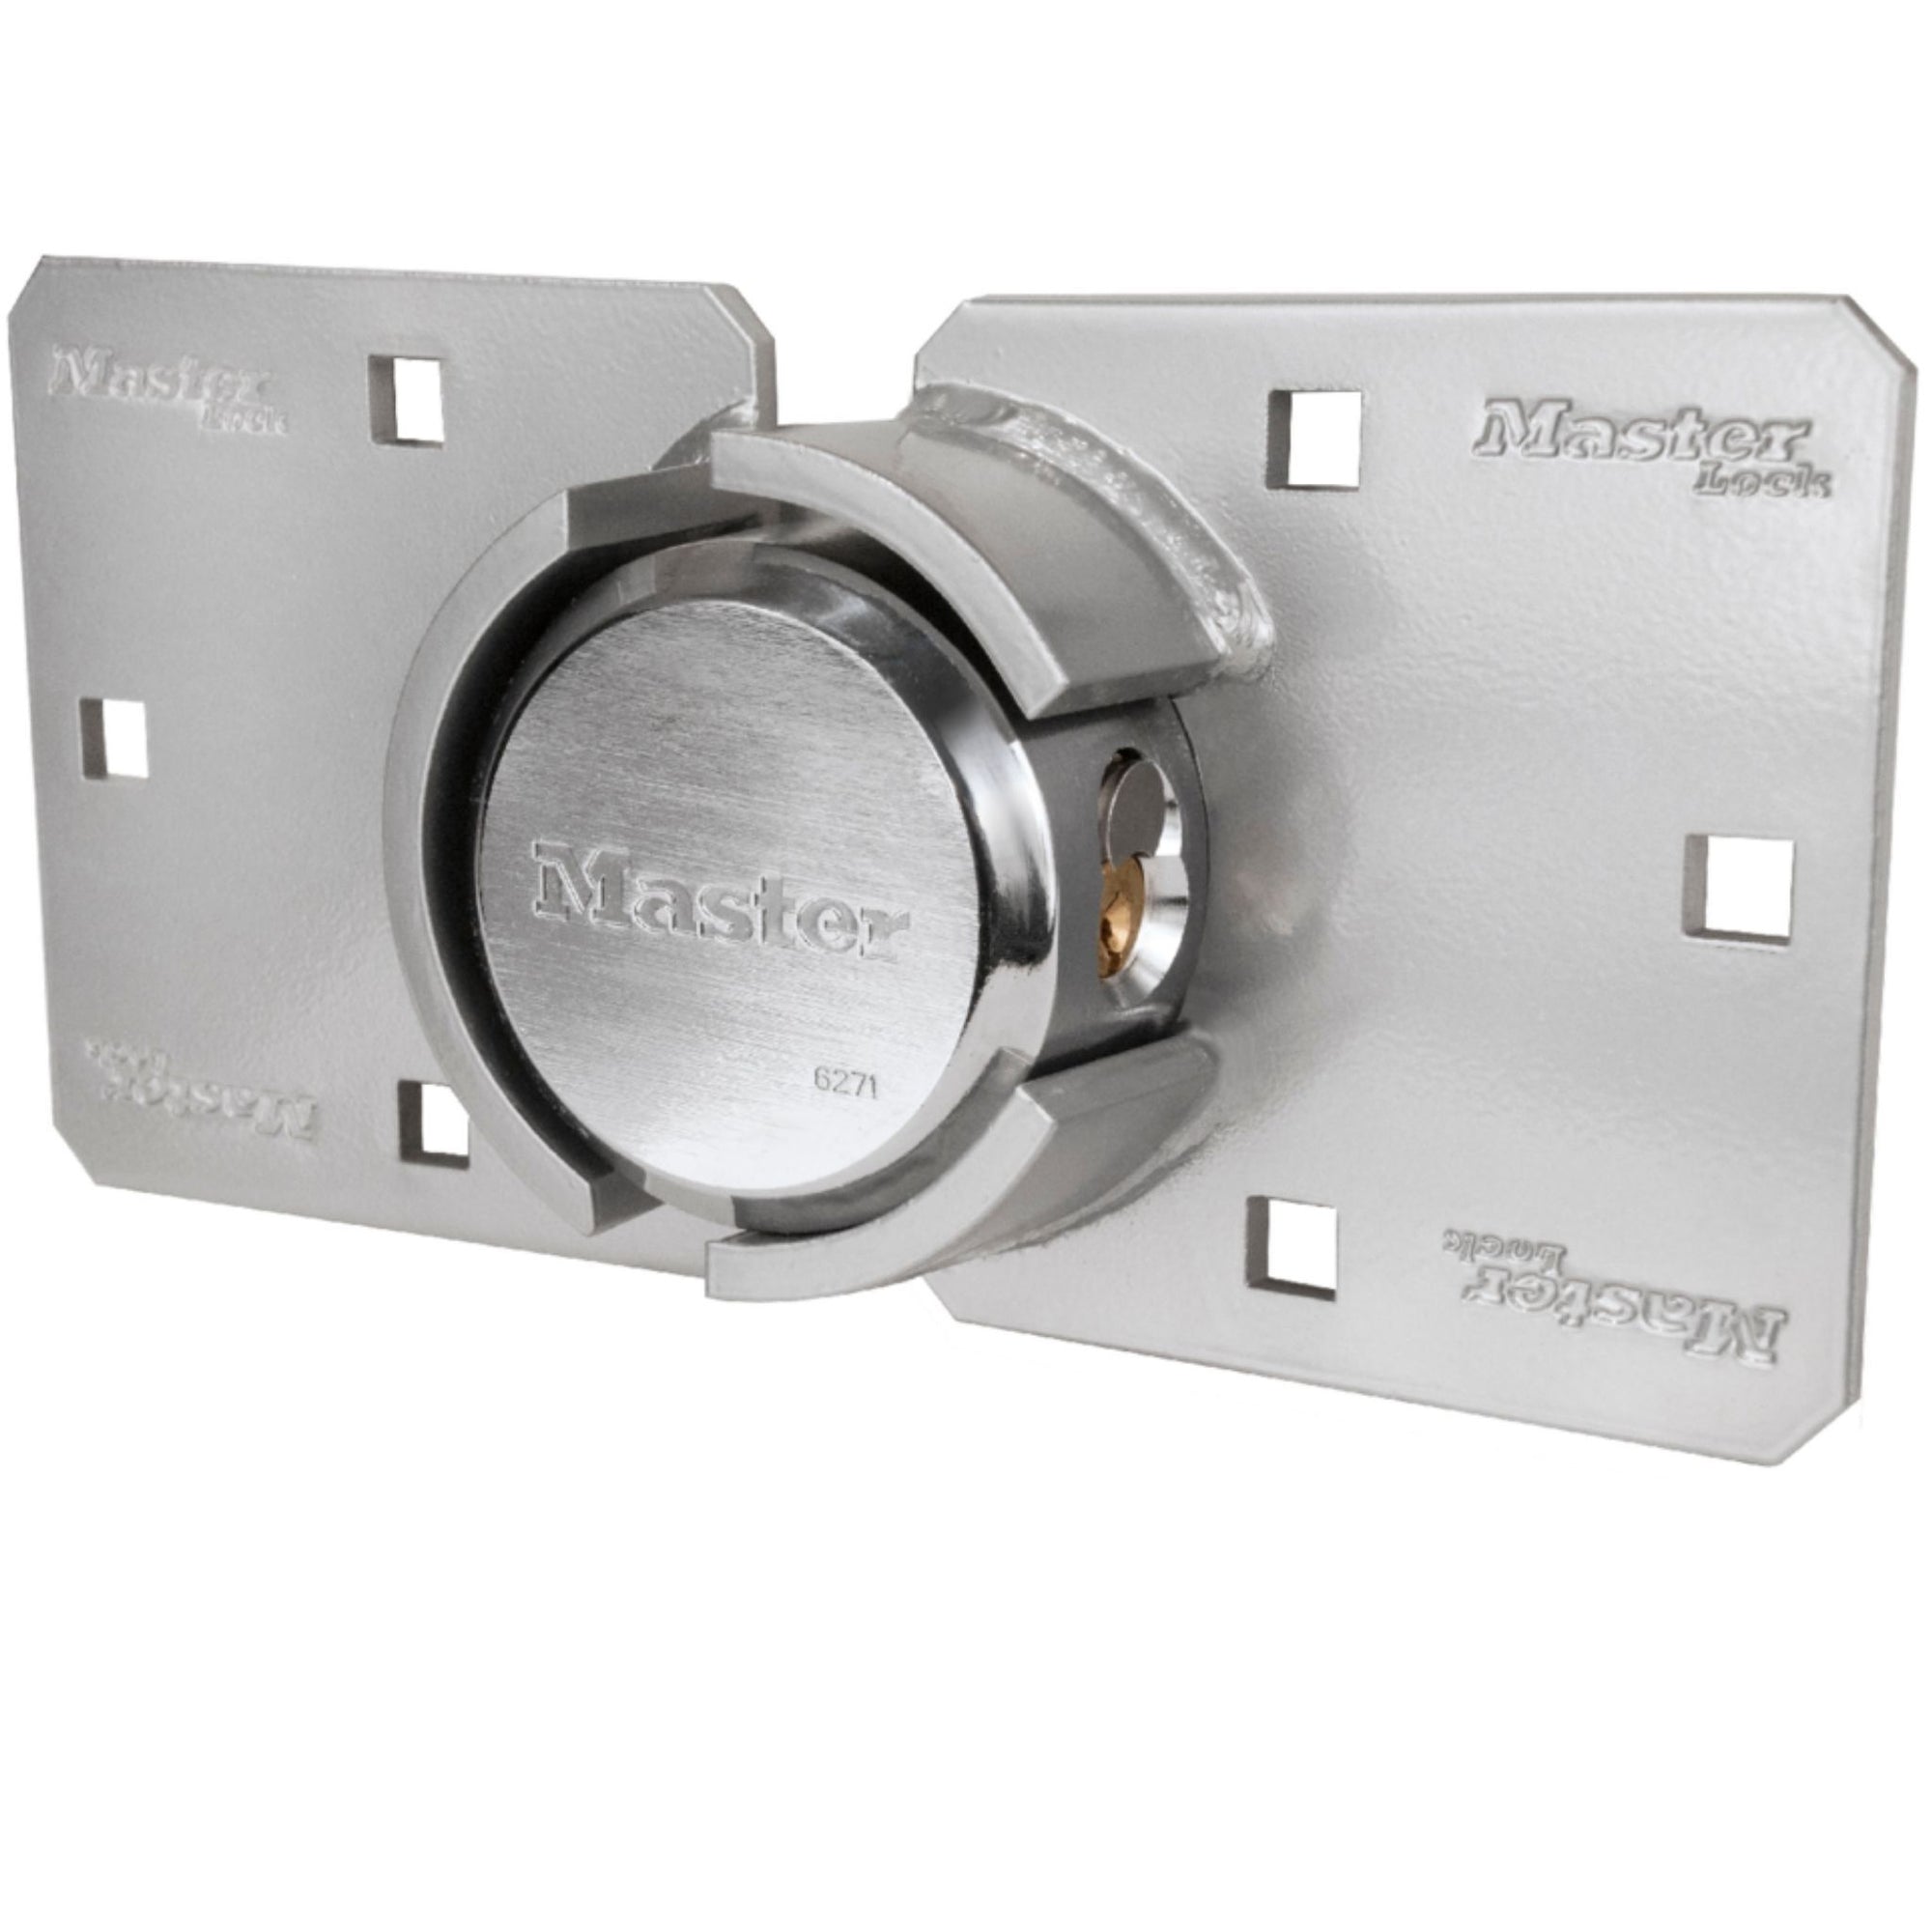 Master Lock No. 770LHC Series Hasp and Hidden Shackle Lock - The Lock Source